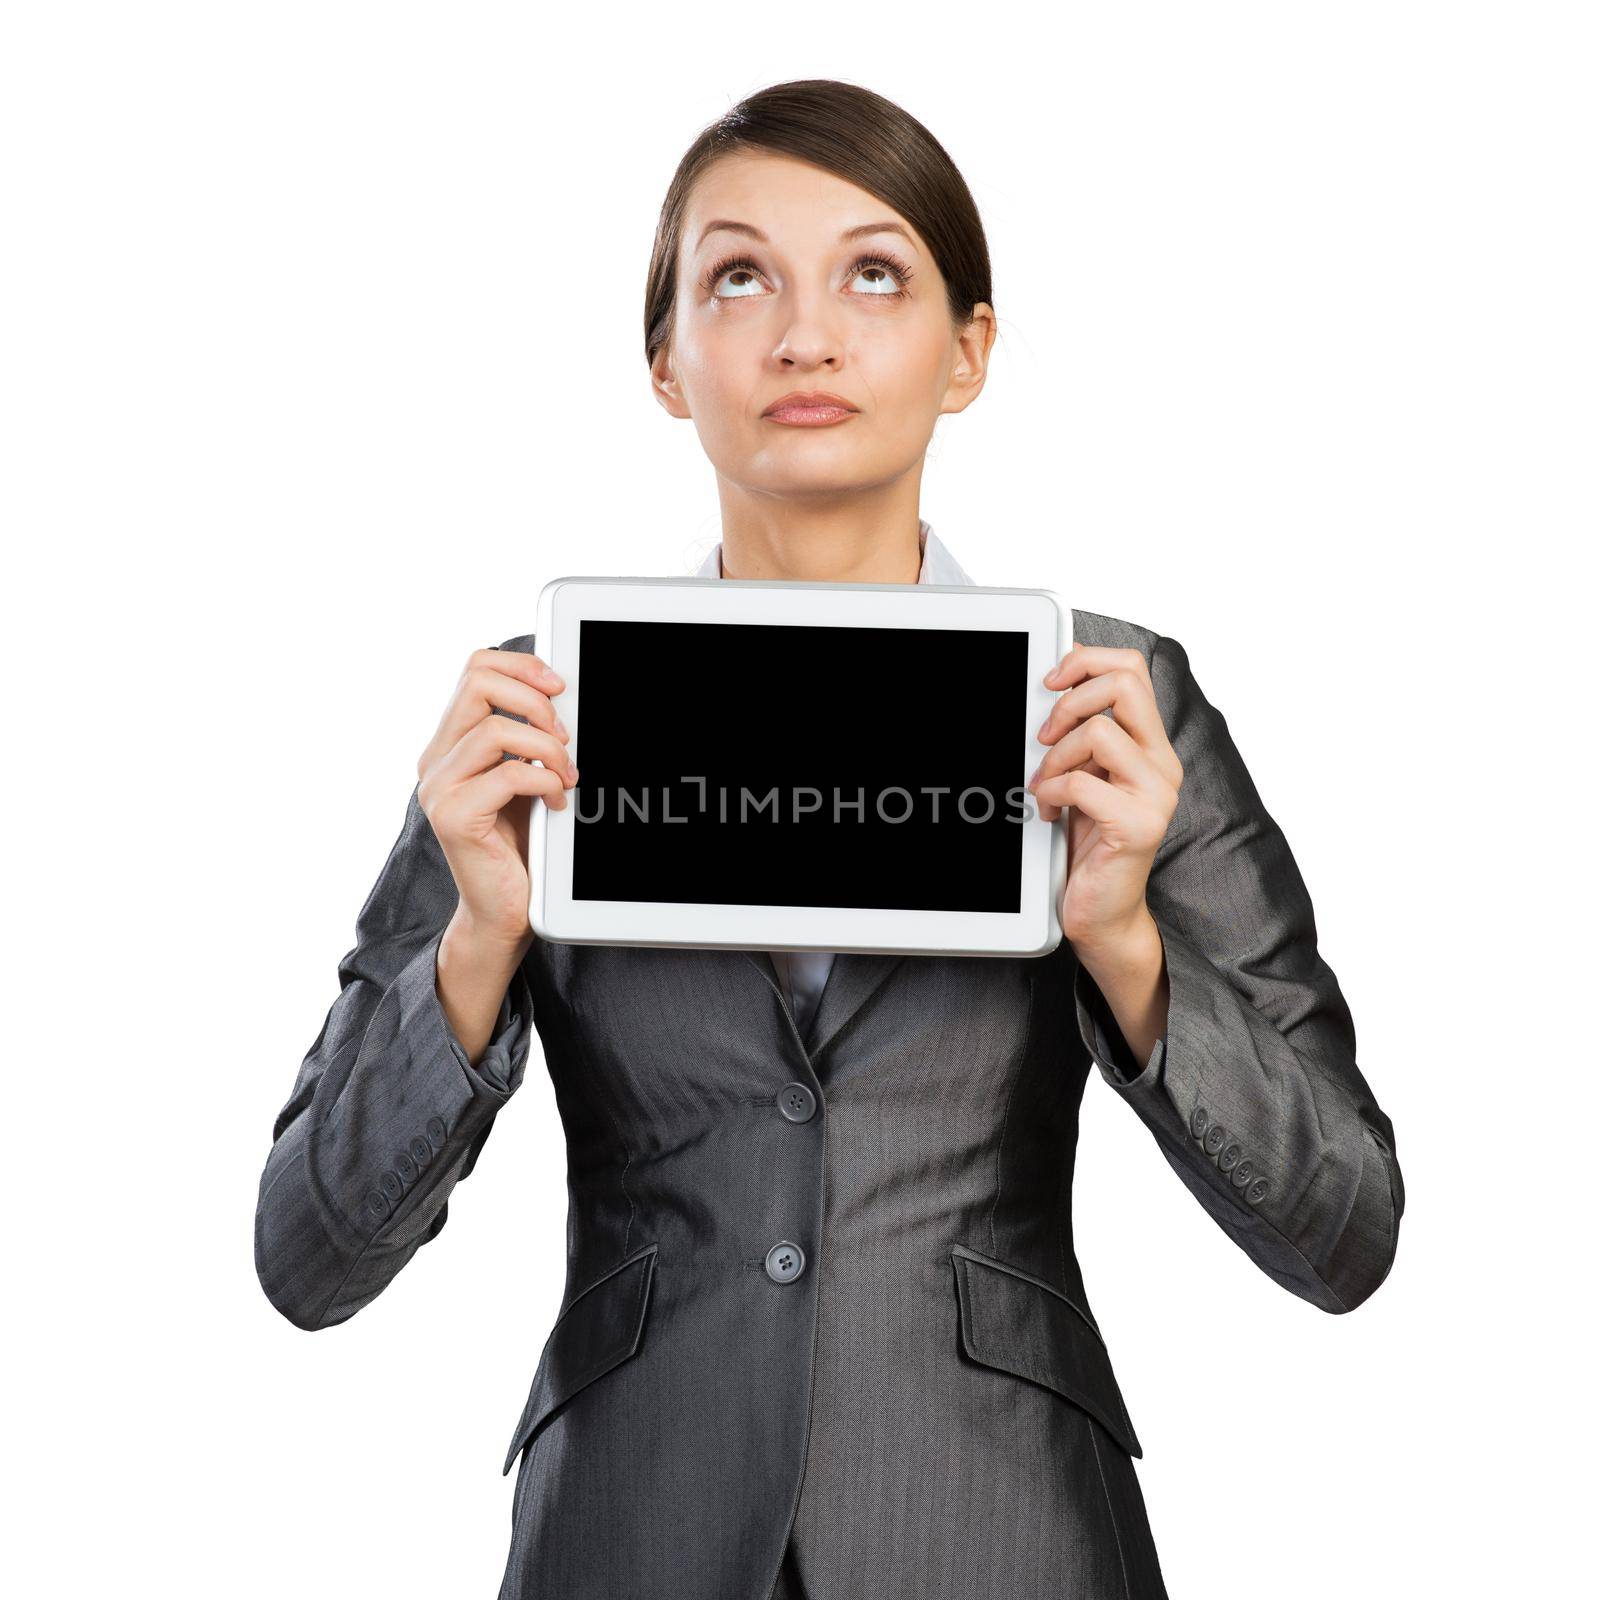 Businesswoman with tablet computer looking upwards. Portrait of attractive woman in formalwear showing tablet PC near her face. Corporate businessperson and digital technology layout with copy space